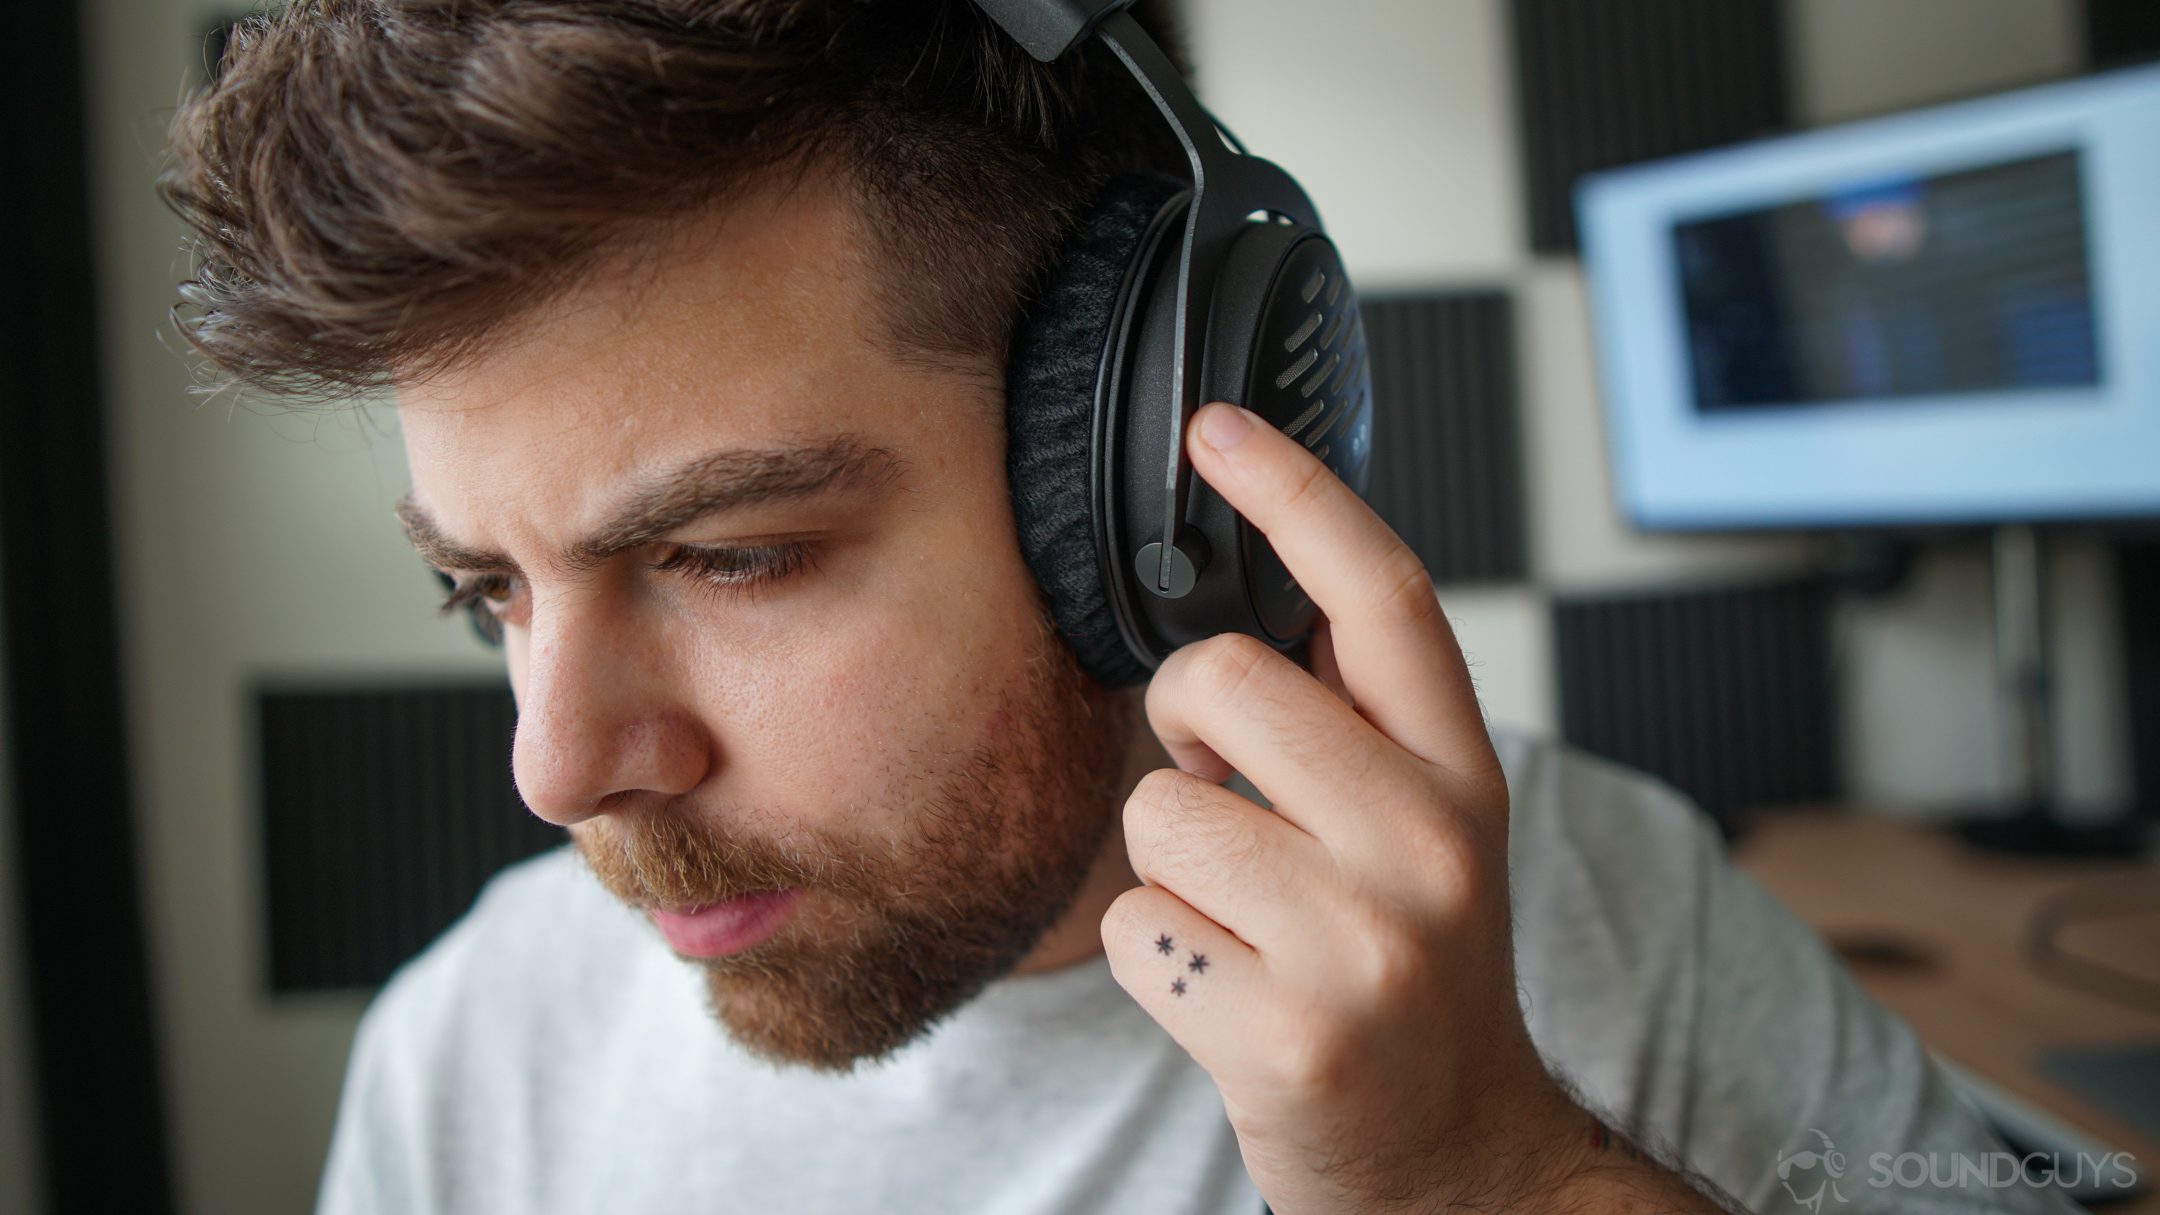 A photo of a man listening to the Beyerdynamic DT 1990 Pro, with high-def equipment, including a DAC